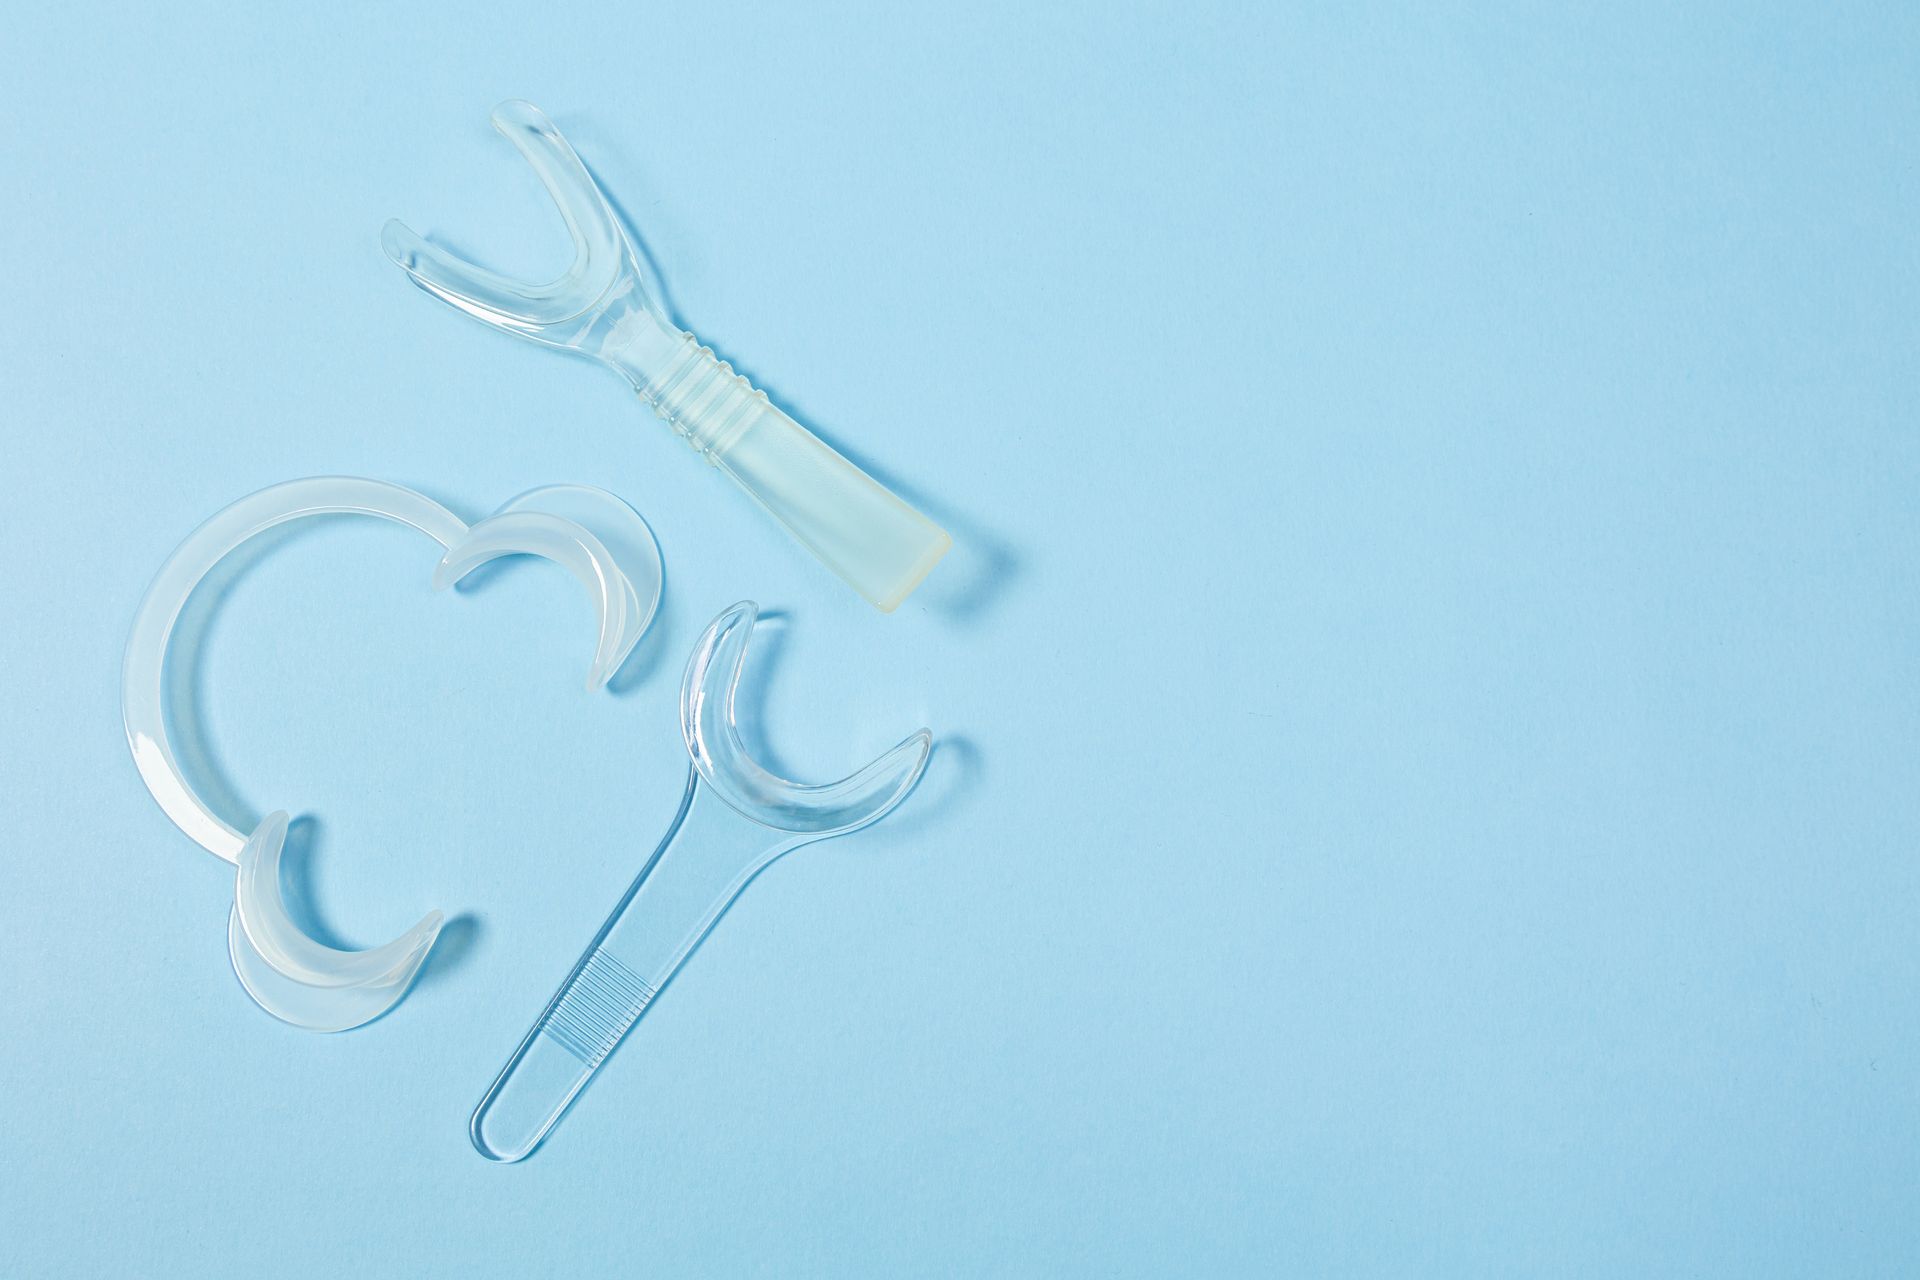 Clear medical supplies on a pale blue background